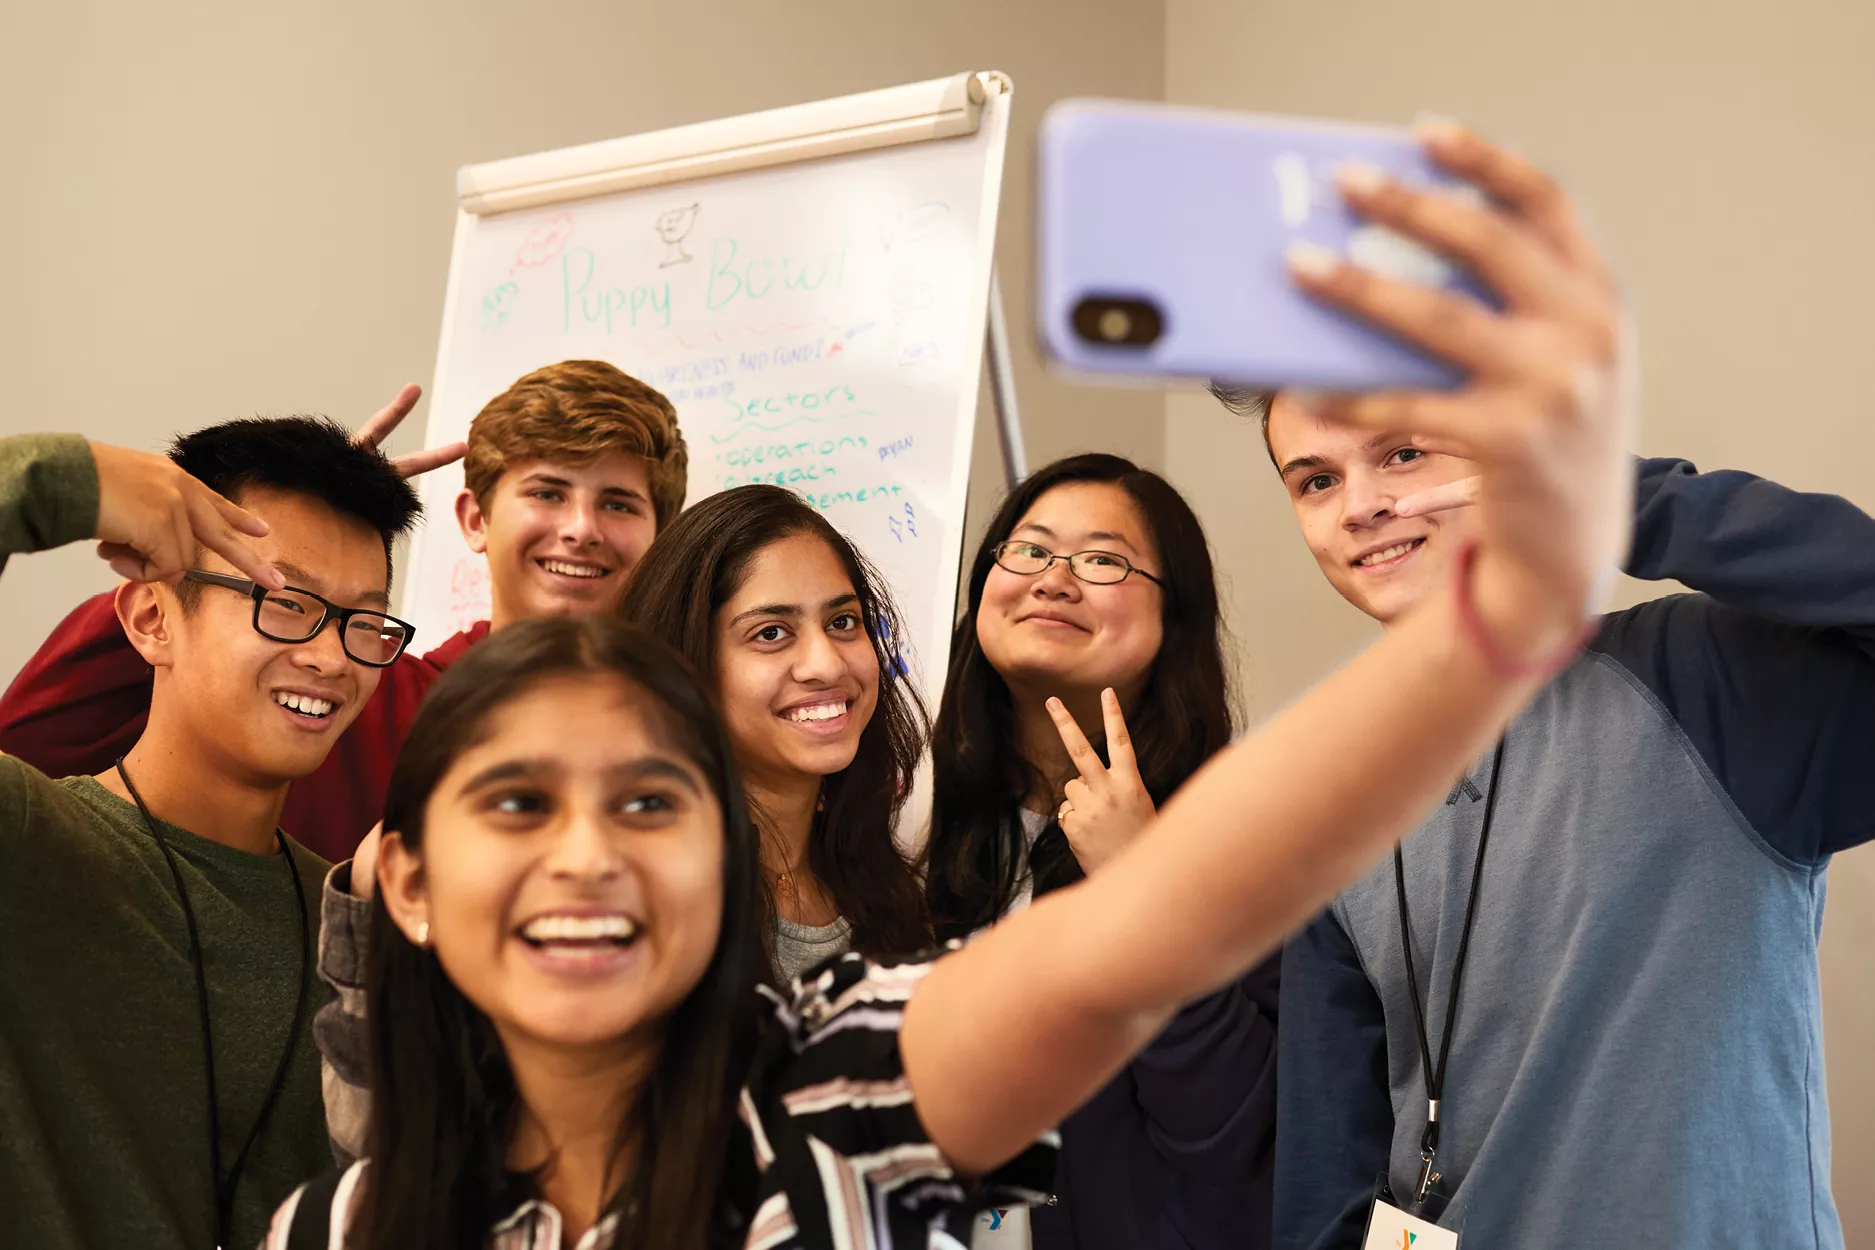 A group of middle school students smiling and posing for a selfie